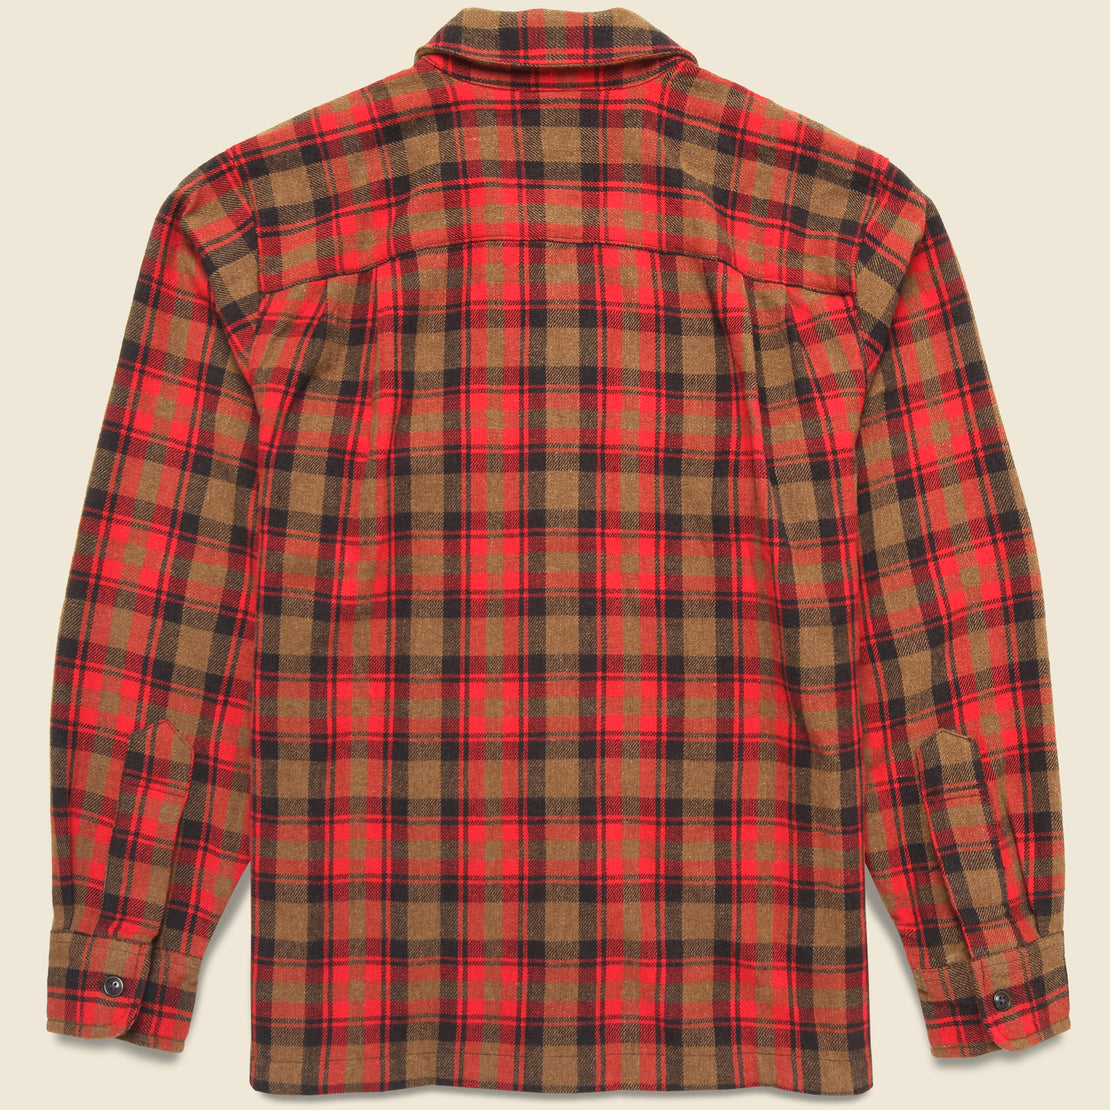 Buckner Wool Camp Shirt - Red Dark Earth/Brown Plaid - Filson - STAG Provisions - Tops - L/S Woven - Plaid